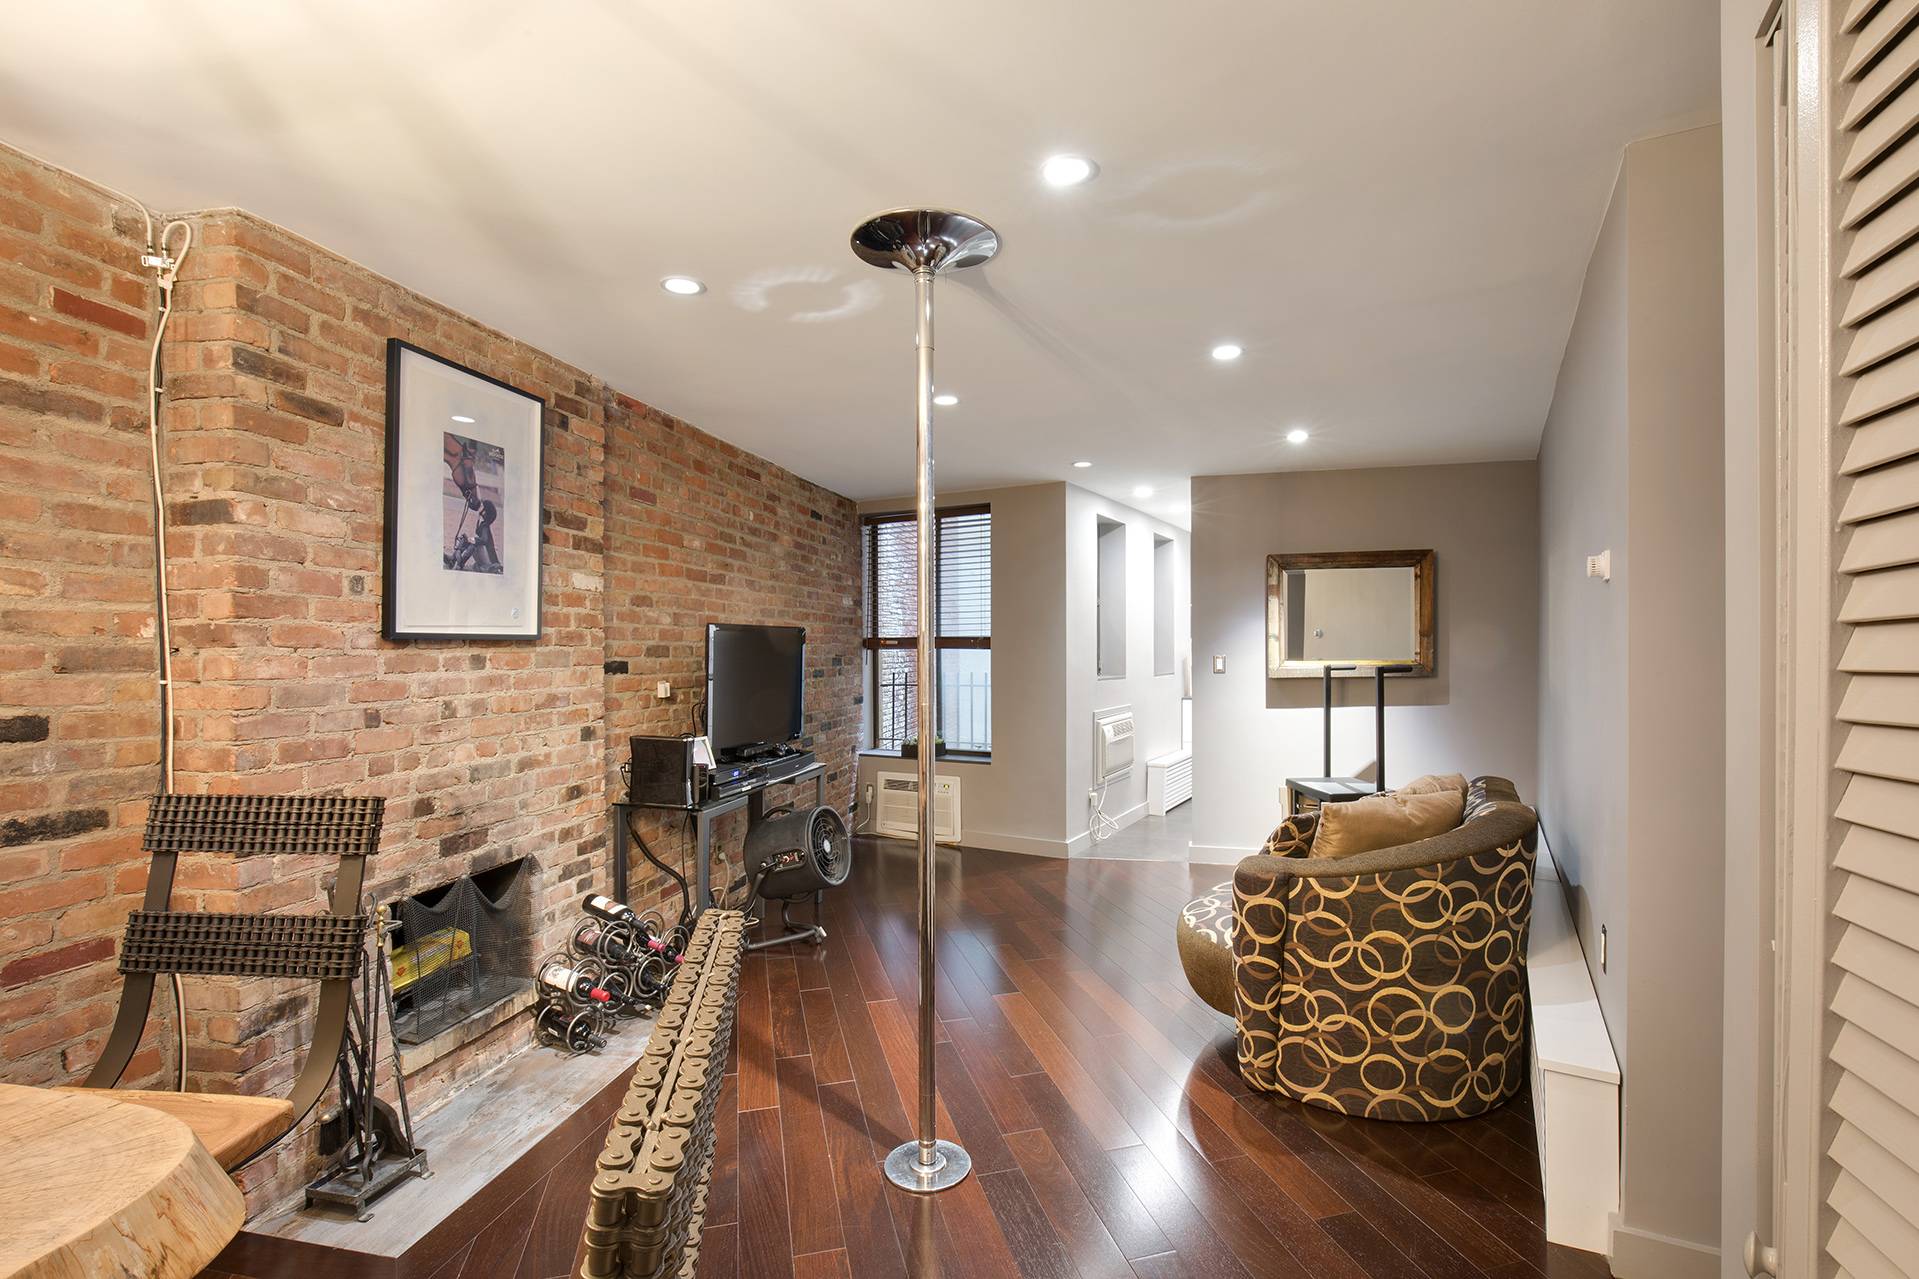 Greenwich Village , 1BR/1BA Duplex, Elevator Building, Wood Burning Fireplace, Exposed Brick, Newly Renovated